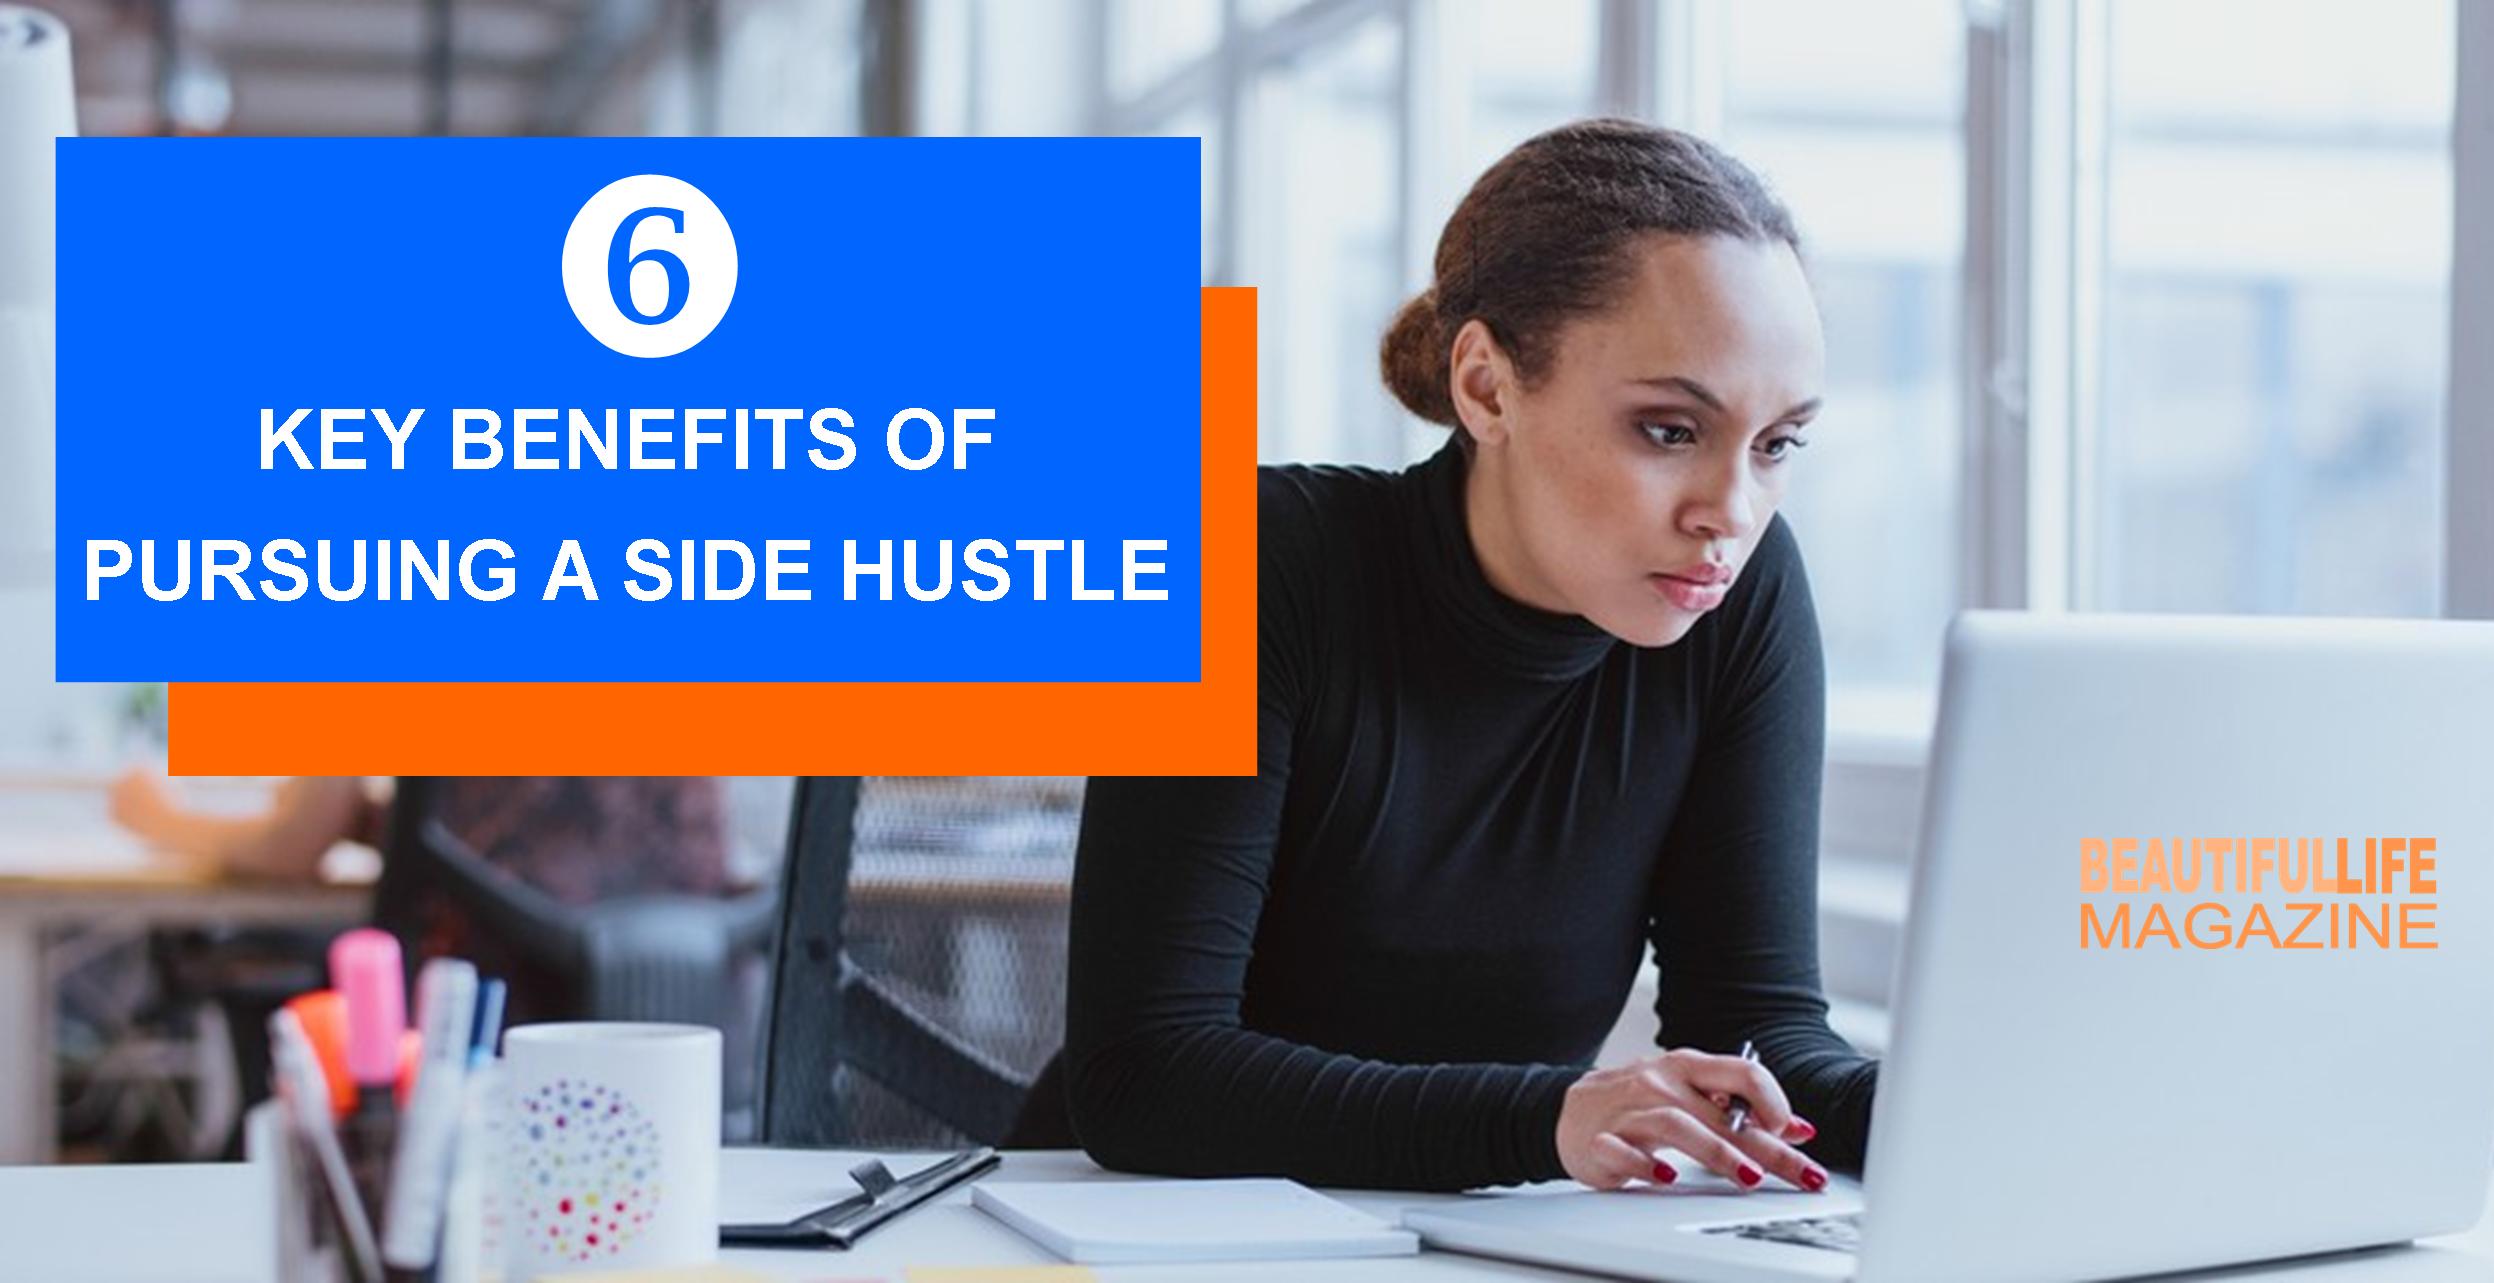 Regardless of the type of interest you decide to pursue, having a side hustle outside of work has a number of social, professional, and personal benefits—here are a few.